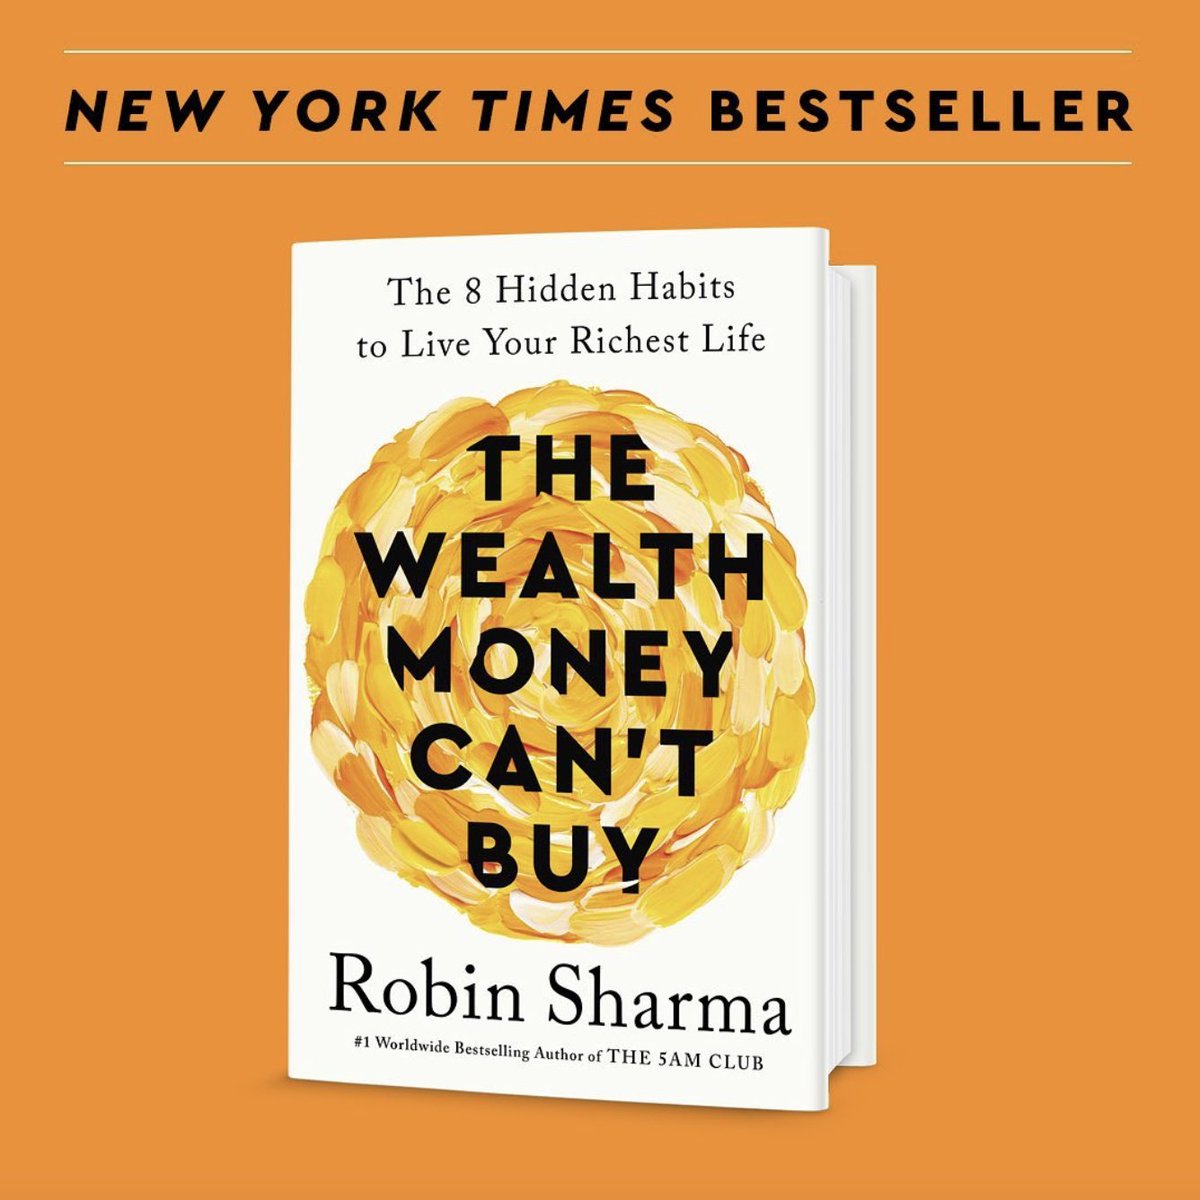 Just heard from my U.S. publisher that the new book has debuted on The New York Times bestsellers list, after its first week of release. I am humbled, grateful and so thankful to each of my readers for making this come true.